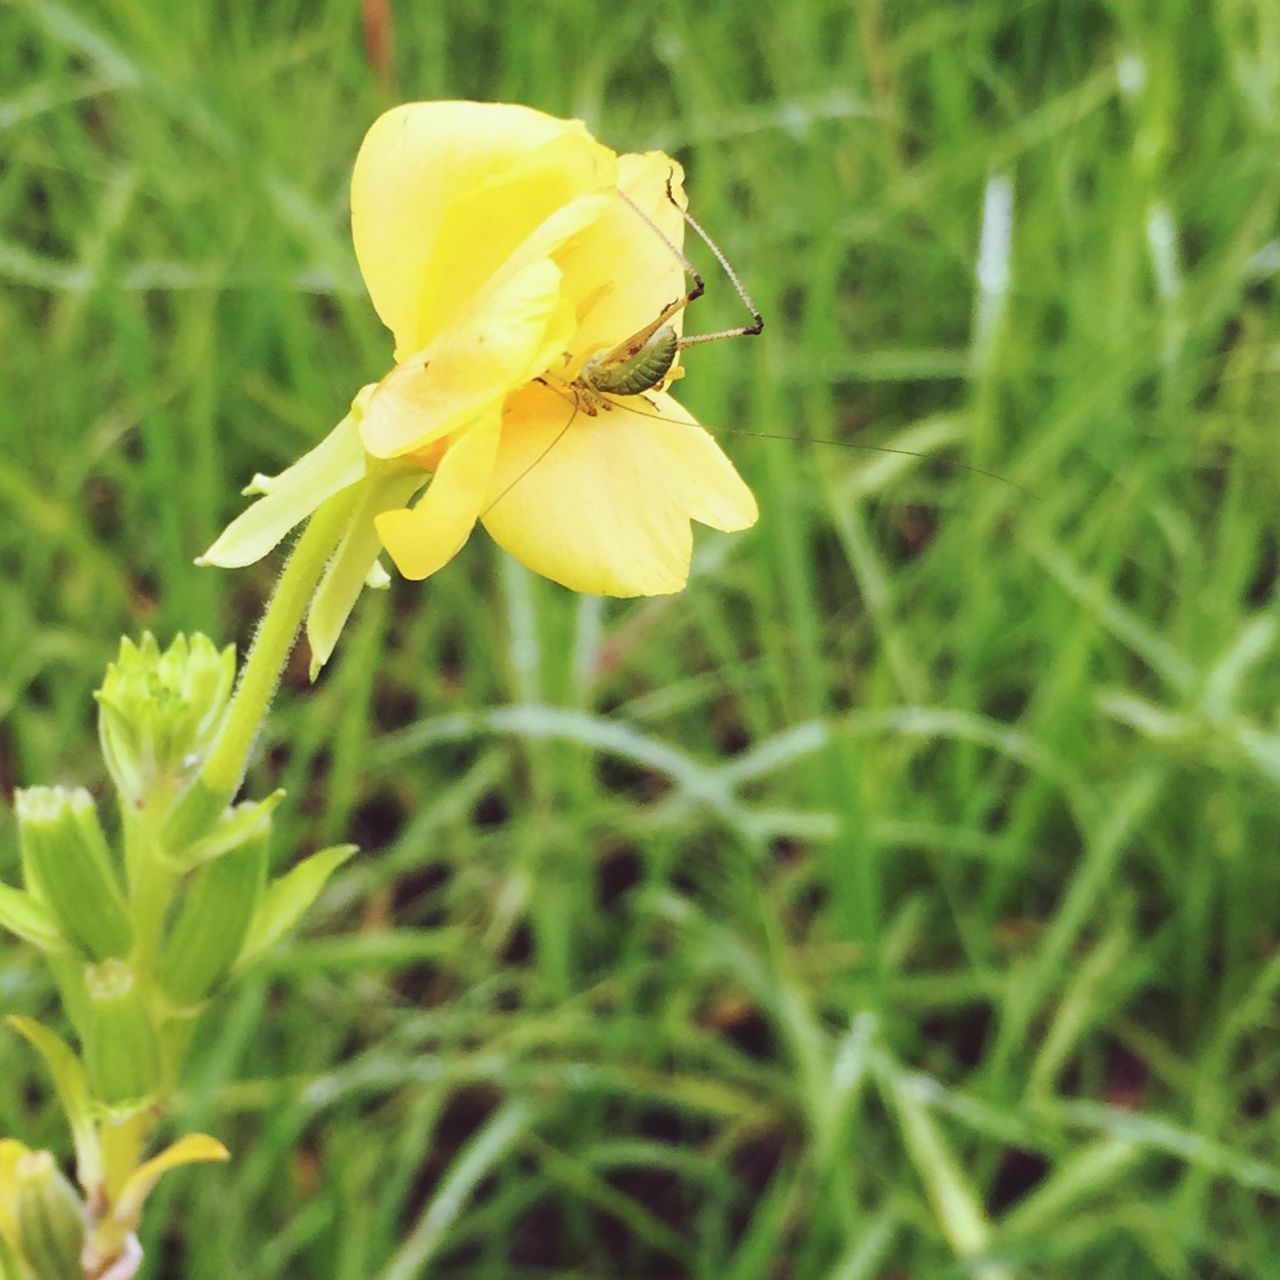 flower, petal, freshness, fragility, flower head, yellow, growth, beauty in nature, blooming, nature, focus on foreground, plant, close-up, field, in bloom, single flower, green color, grass, outdoors, stem